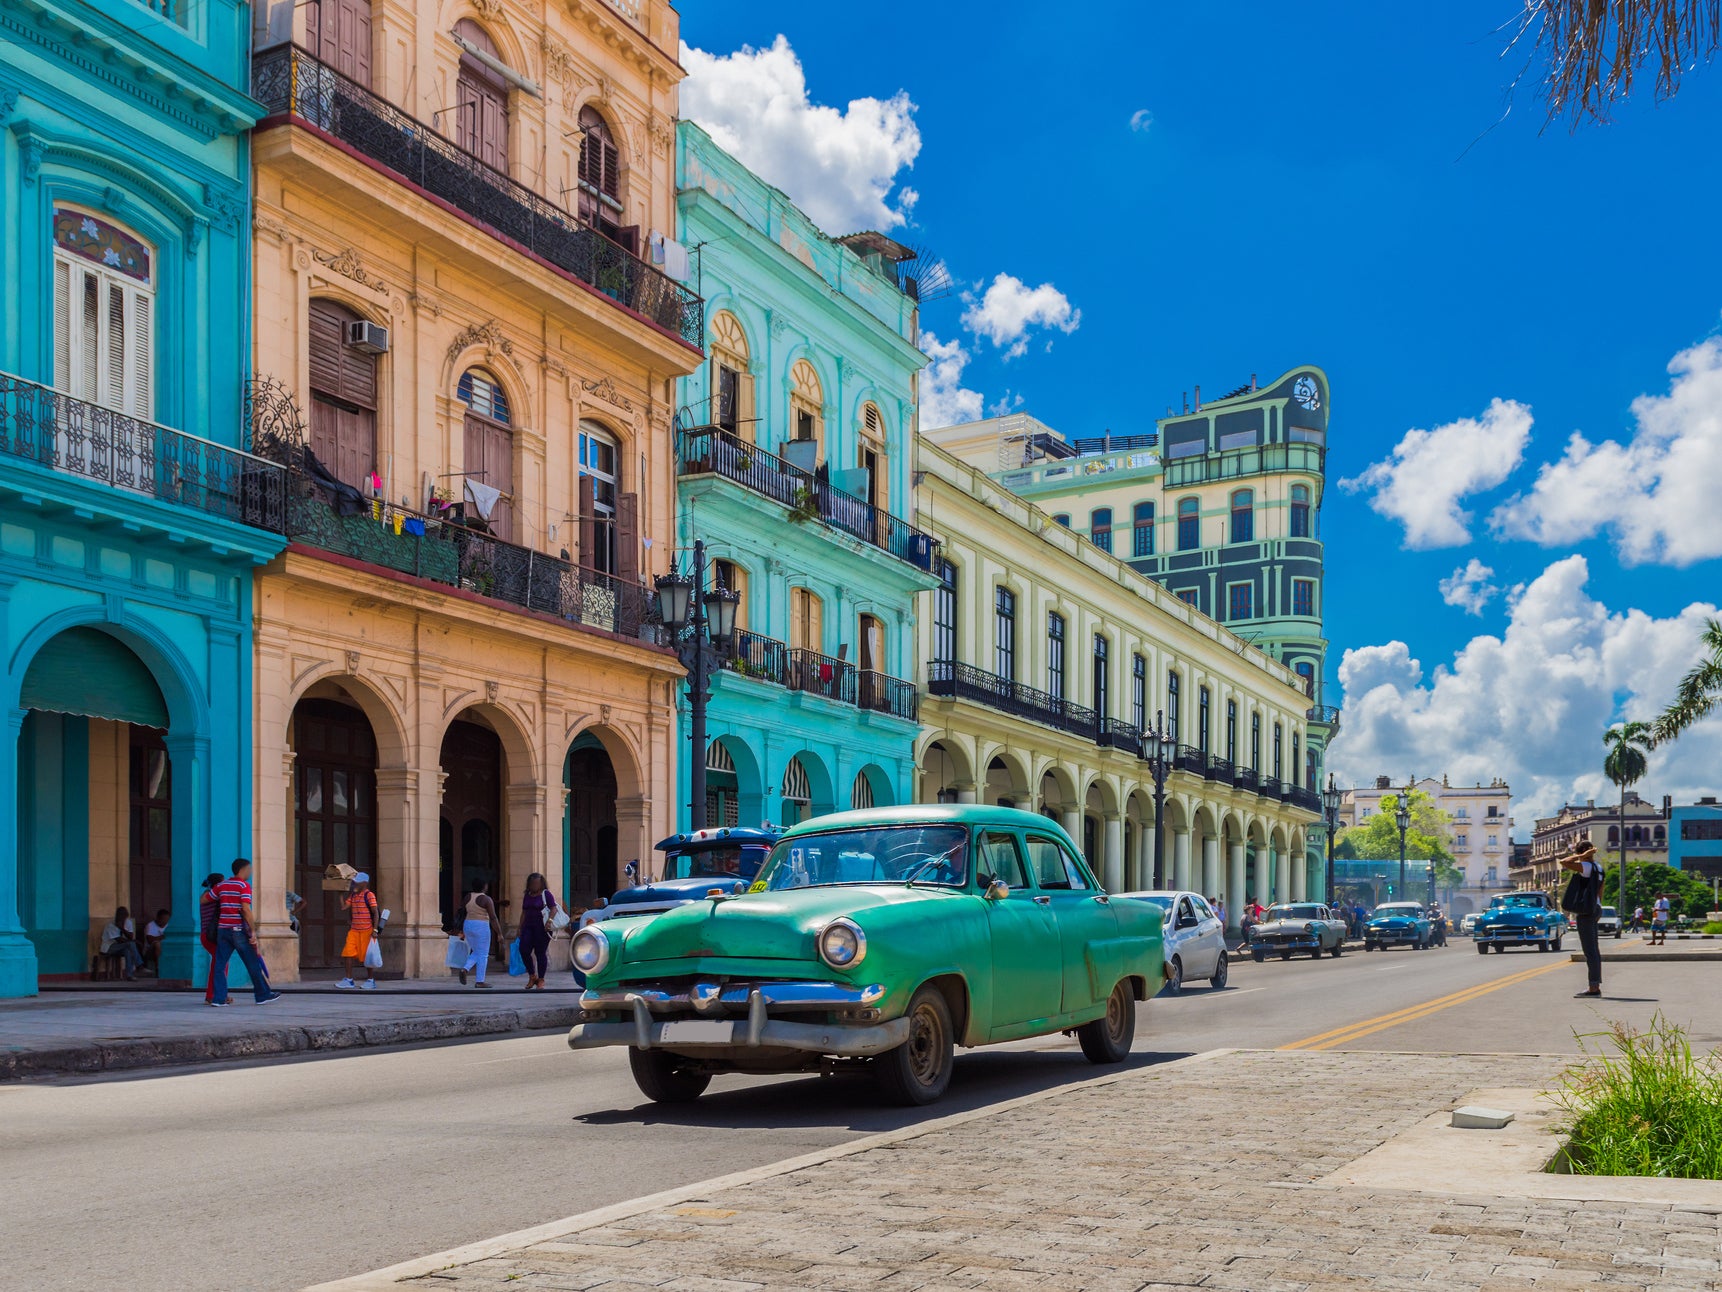 Over £500 is a lot to pay for flight upgrades to the Cuban capital